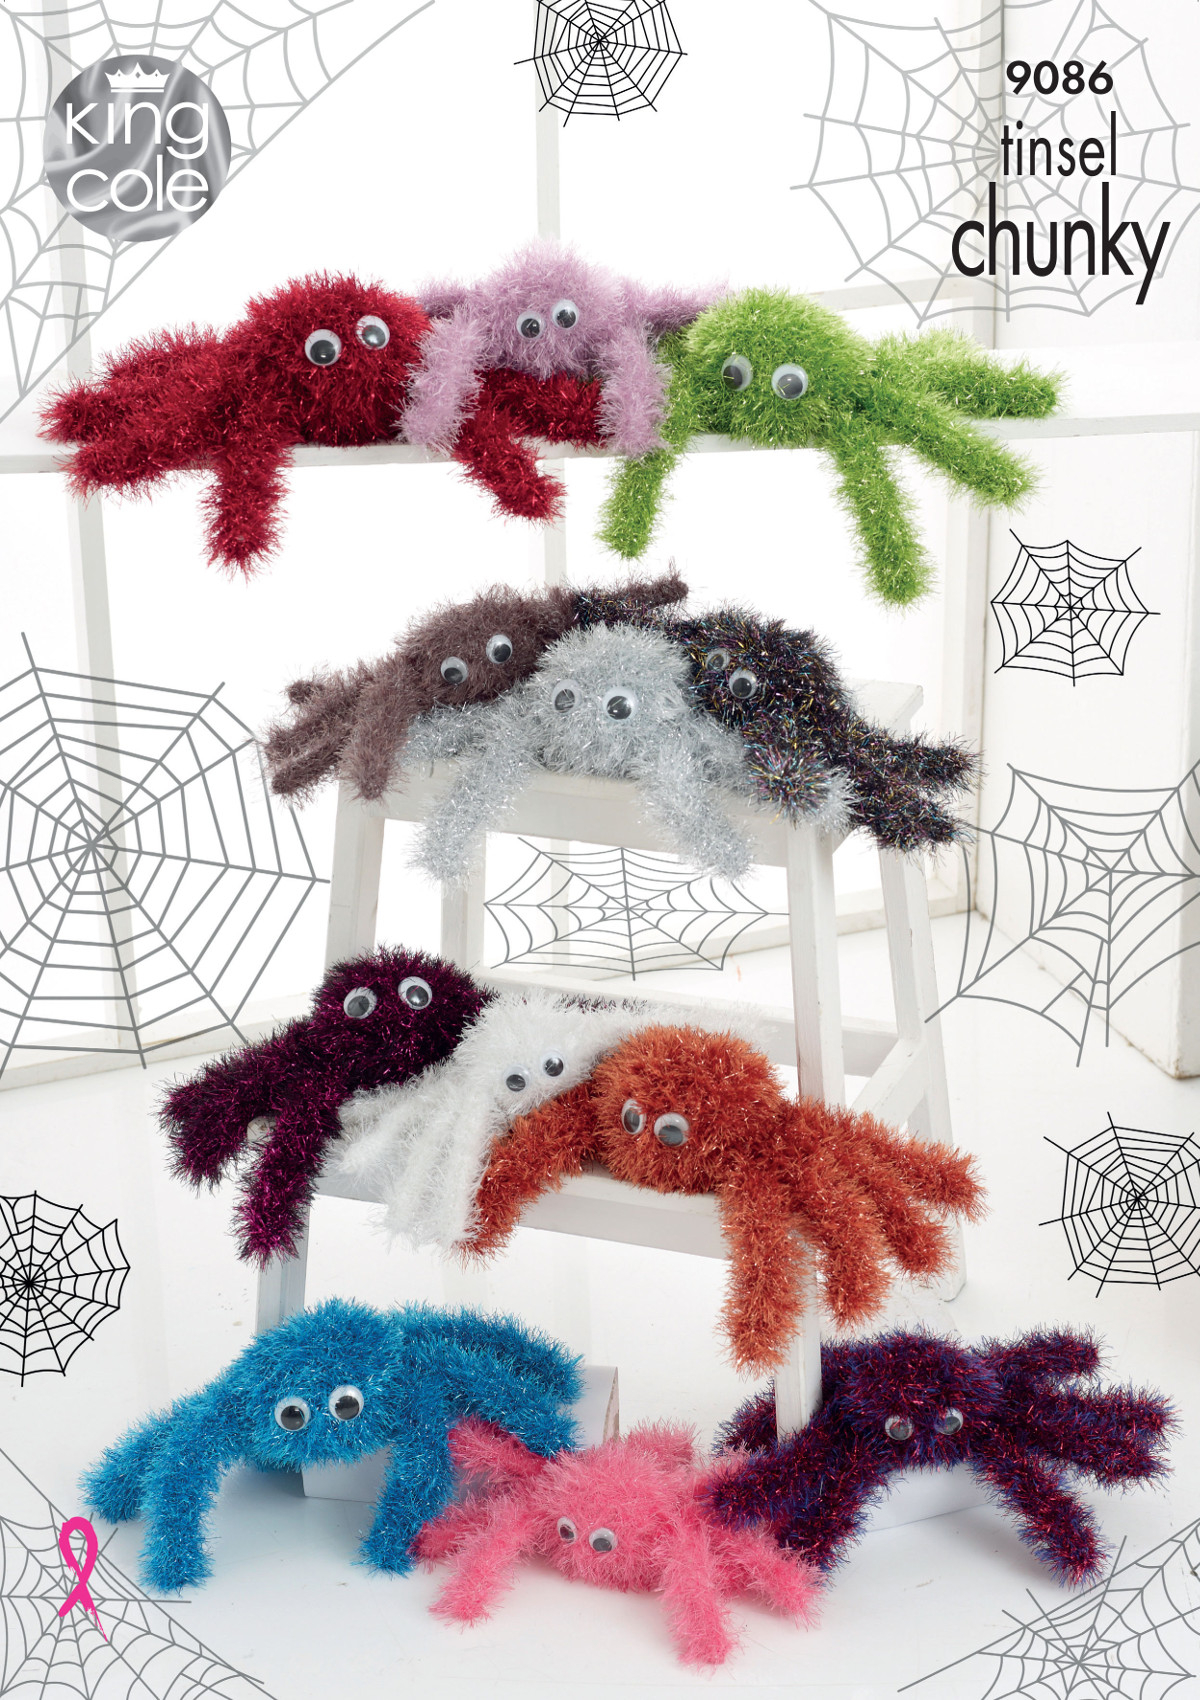 Spider Knitting Pattern Details About Knitting Pattern Halloween Small Large Spider Toys King Cole Tinsel Chunky 9086